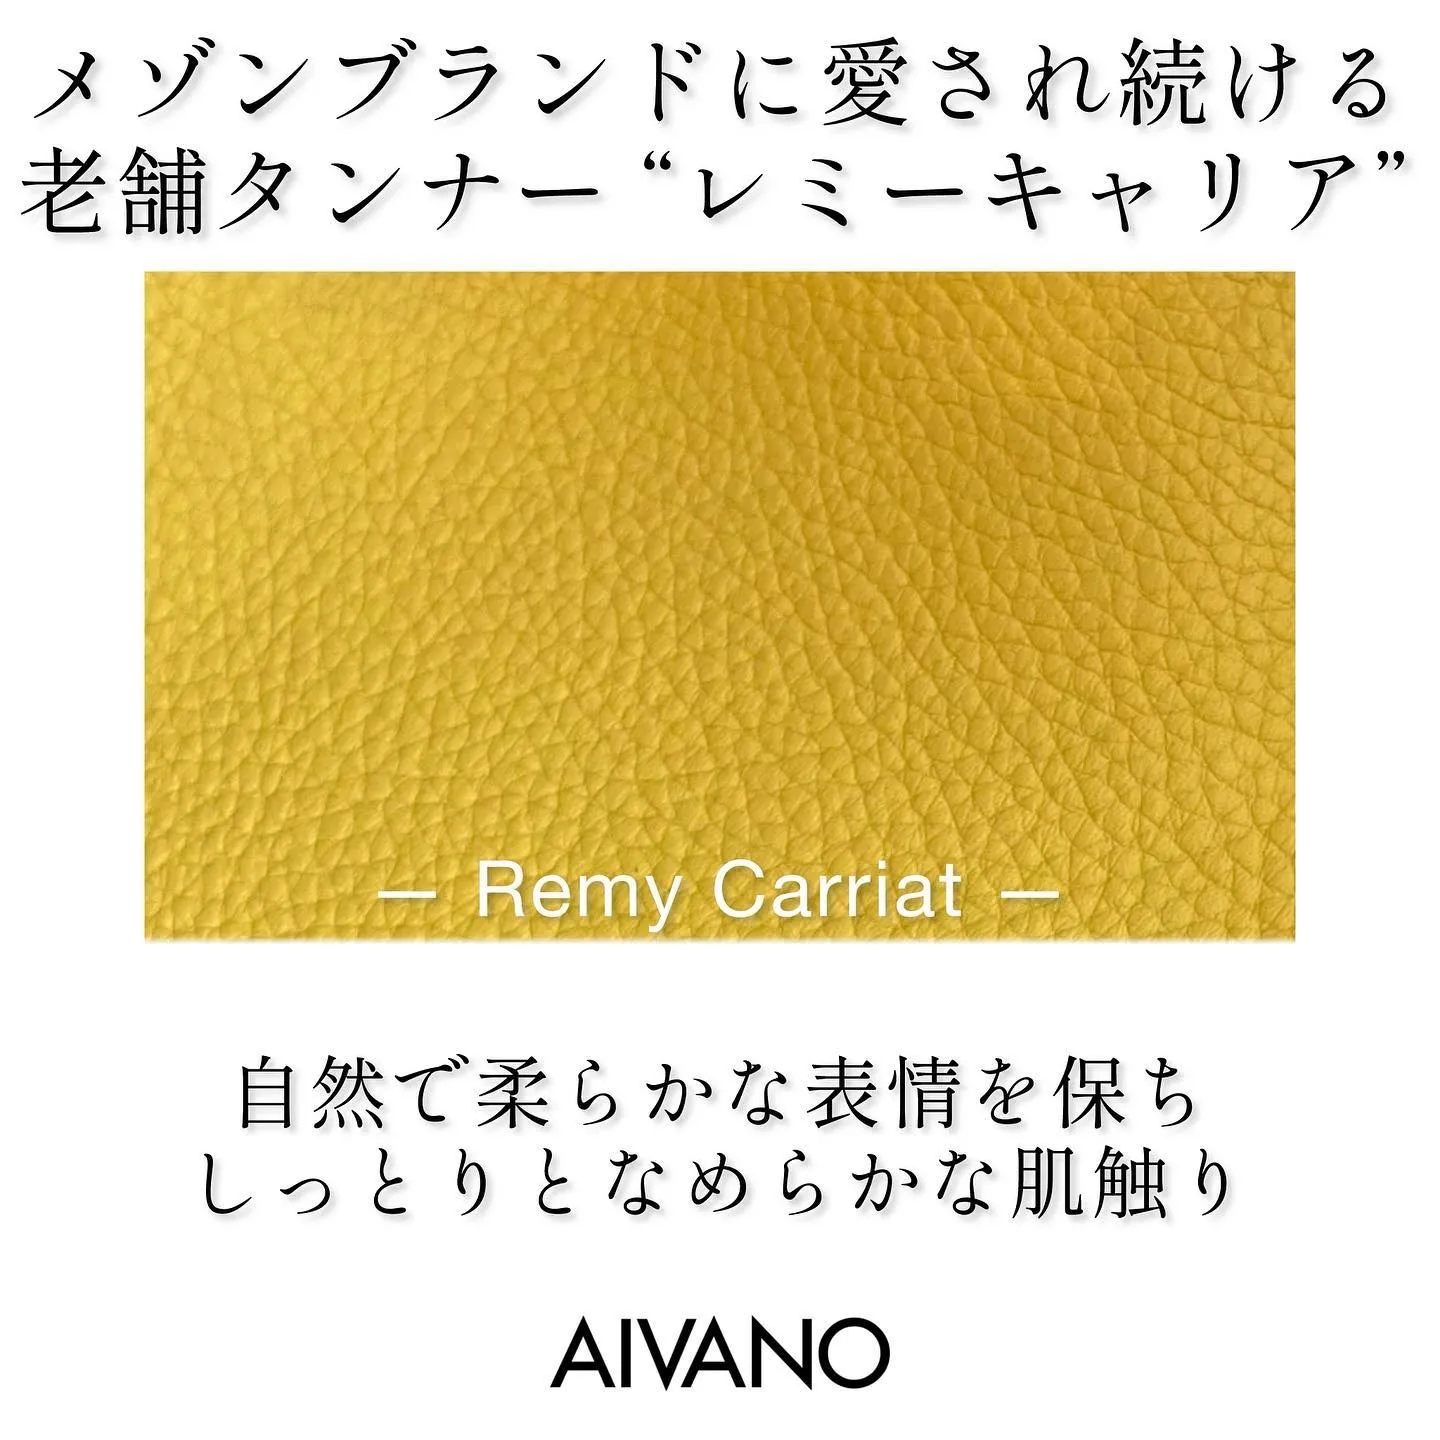 Remy Carriat Tanneryは、1927年にレミ...